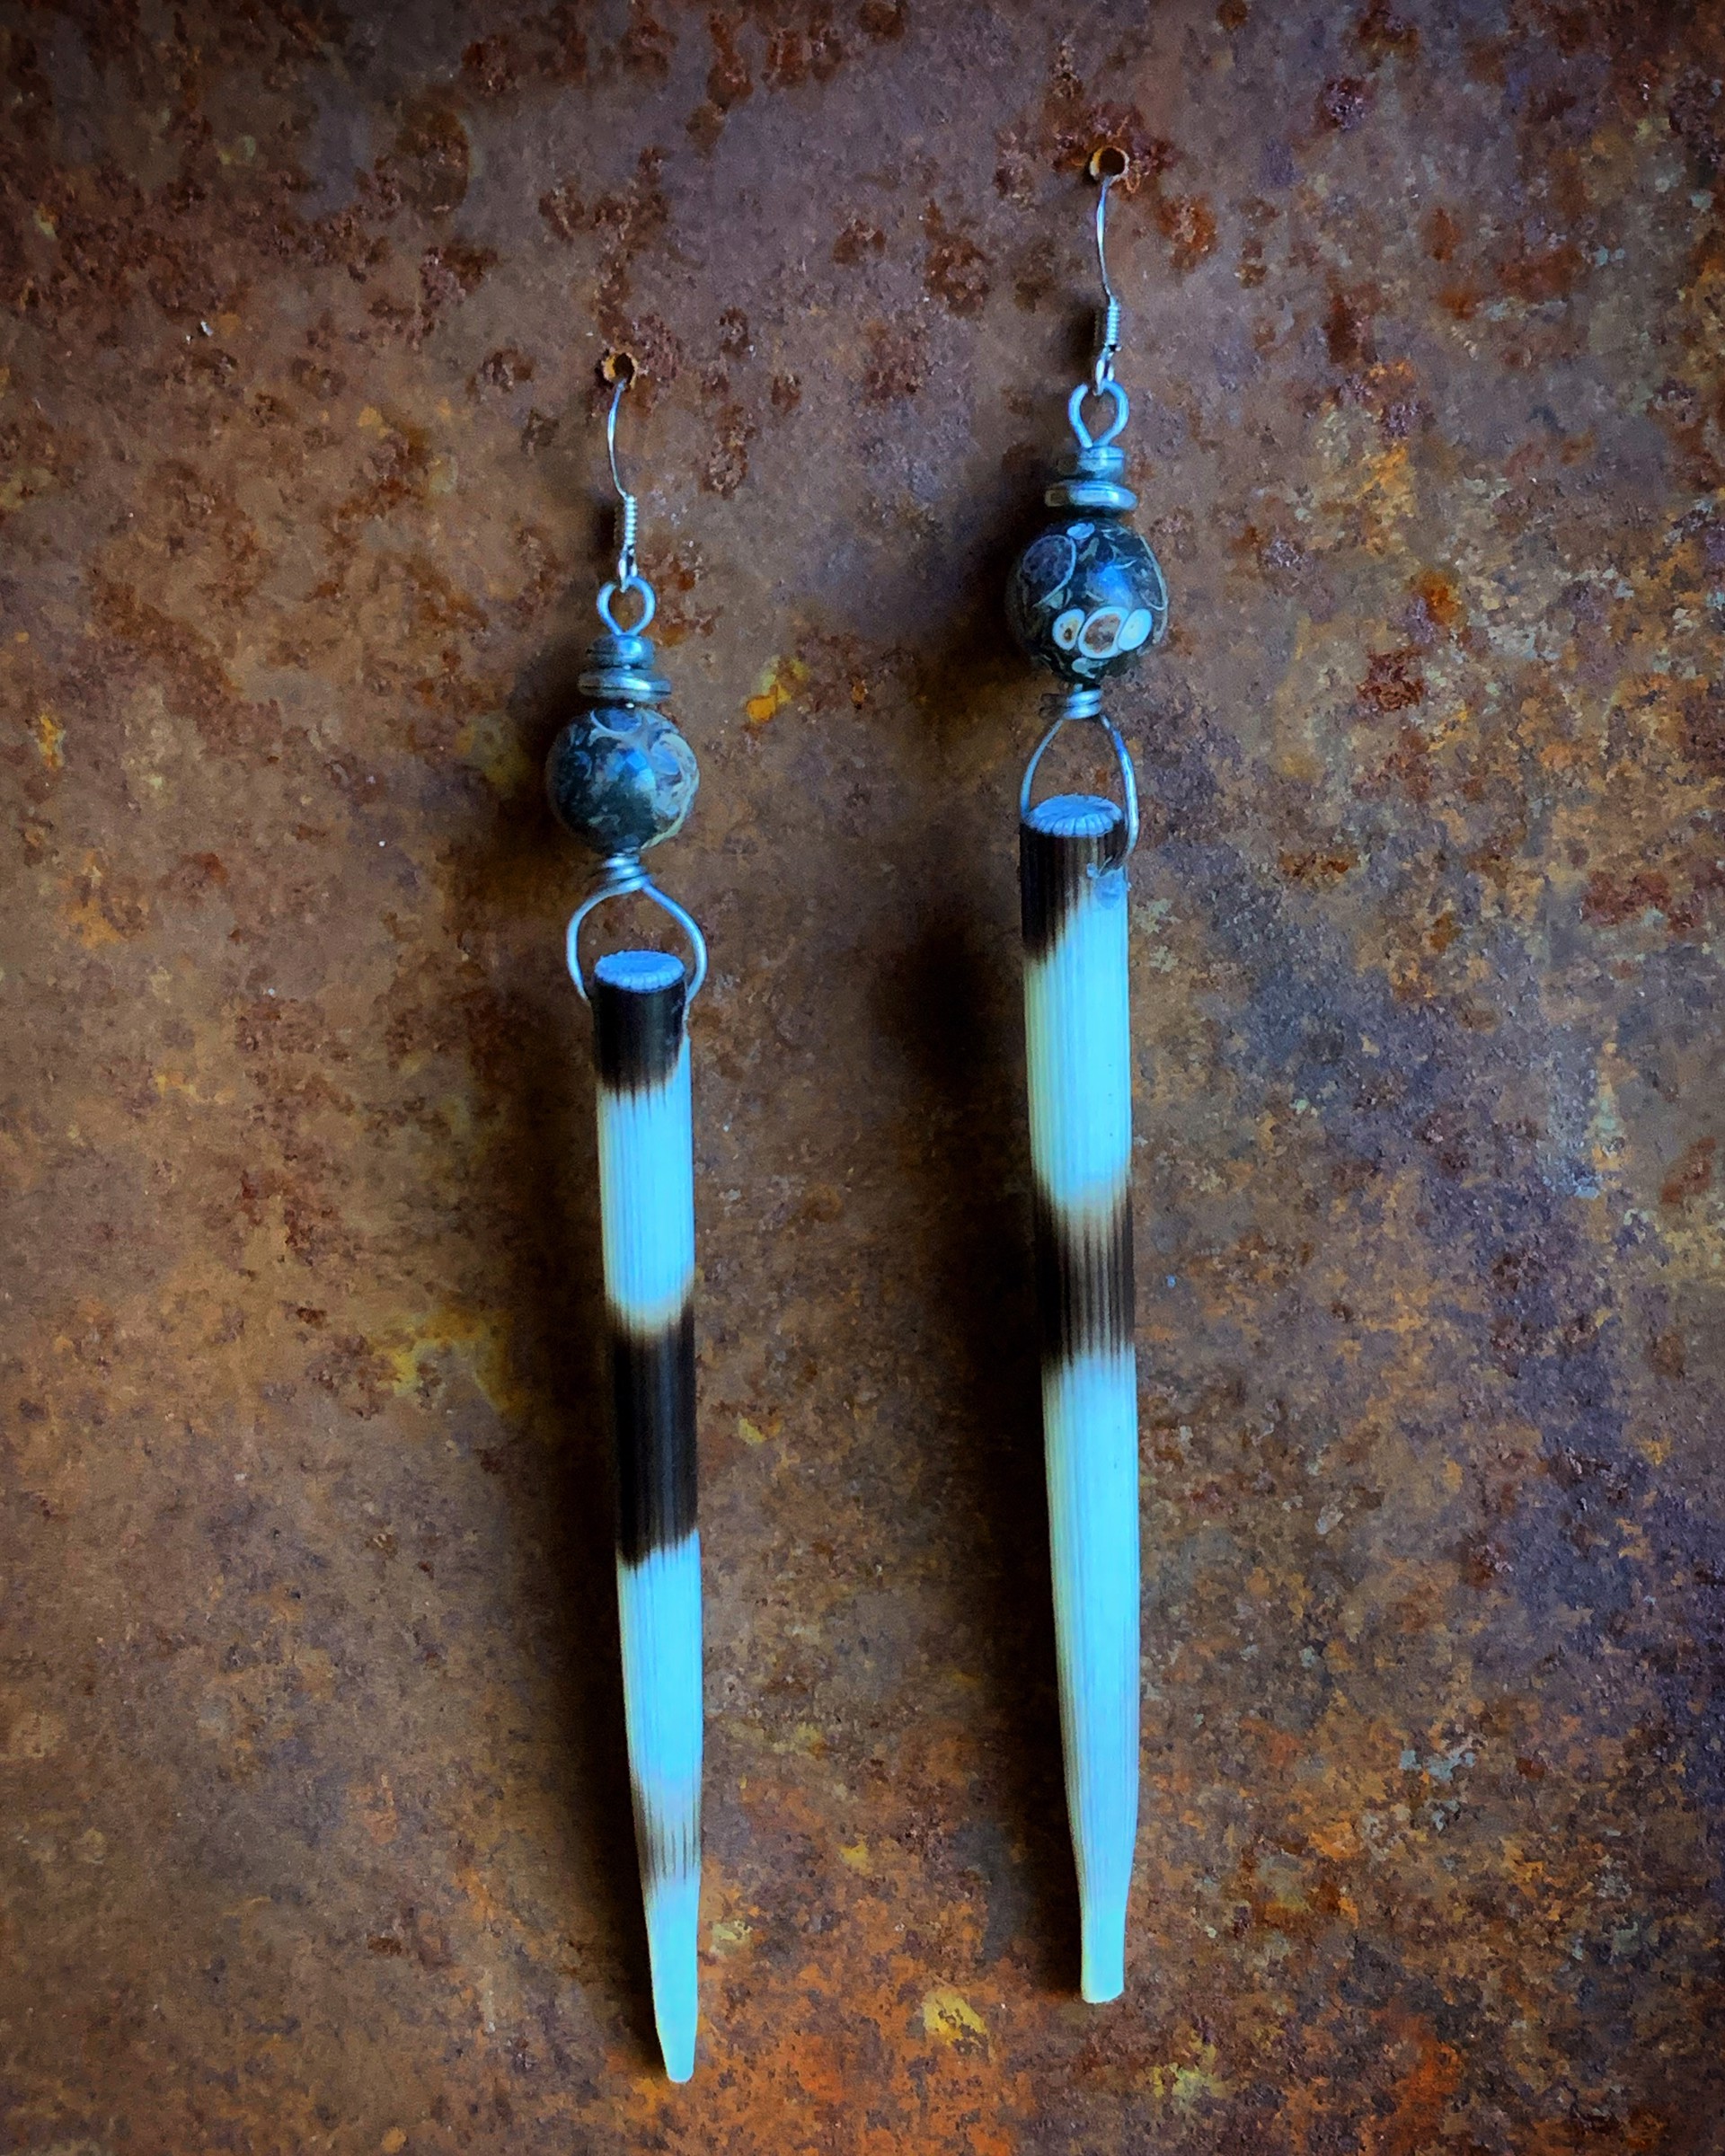 K505 African Porcupine Quills with Fossilized Coral by Kelly Ormsby